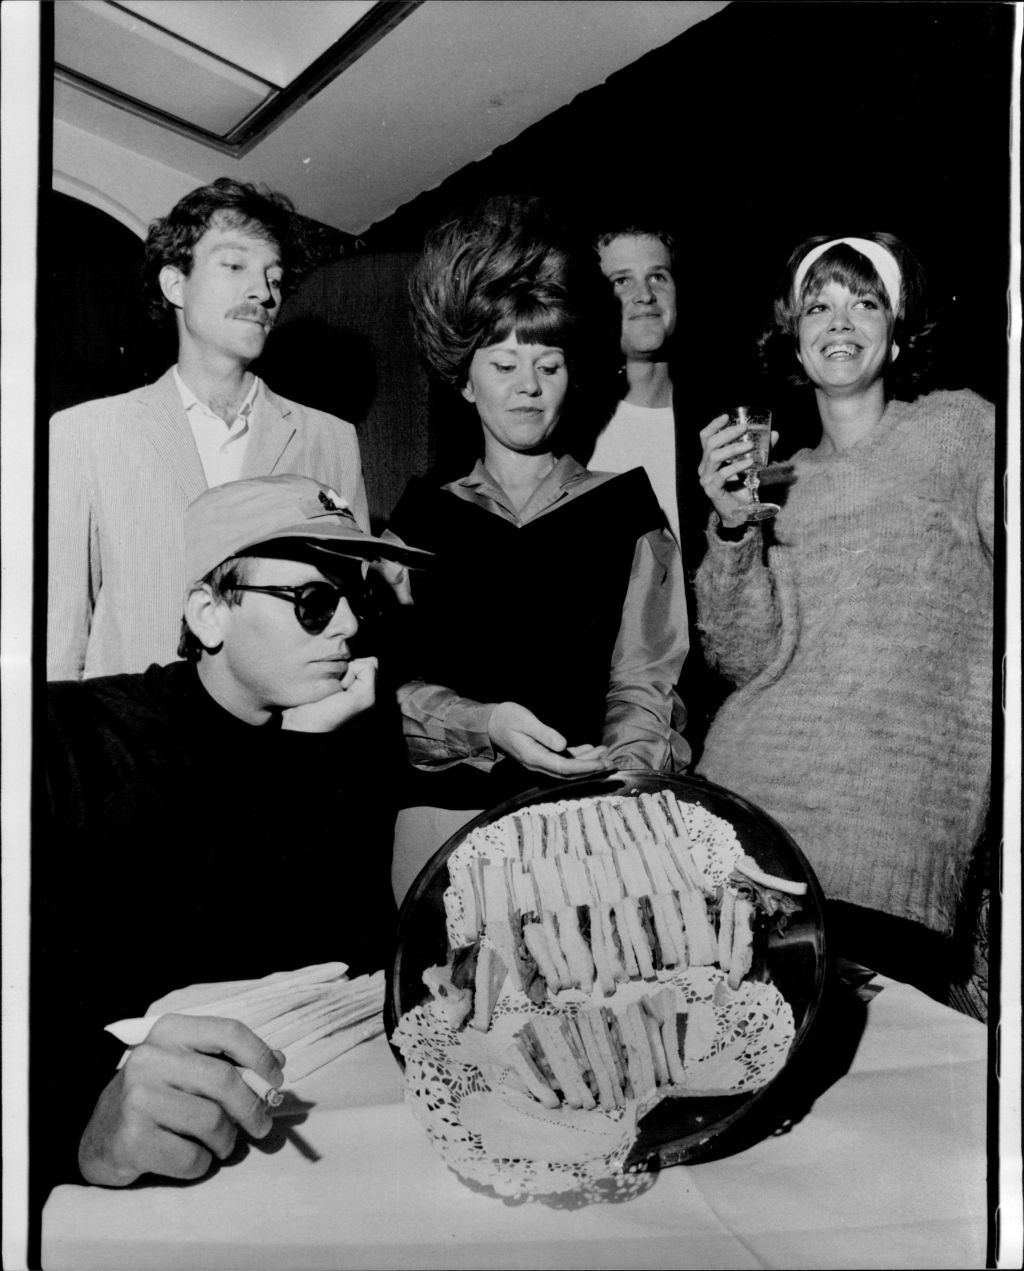 Rock band the B-52s - left to right, Fred Schneider 27, Kate Pierson 31, Keith Strickland 25, and Cindy Wilson 22 (seated) Rickey Wilson 22, at a press conference at the Sebel, June 18, 1980.  Photo: Gerrit Alan Fokkema/Fairfax Media